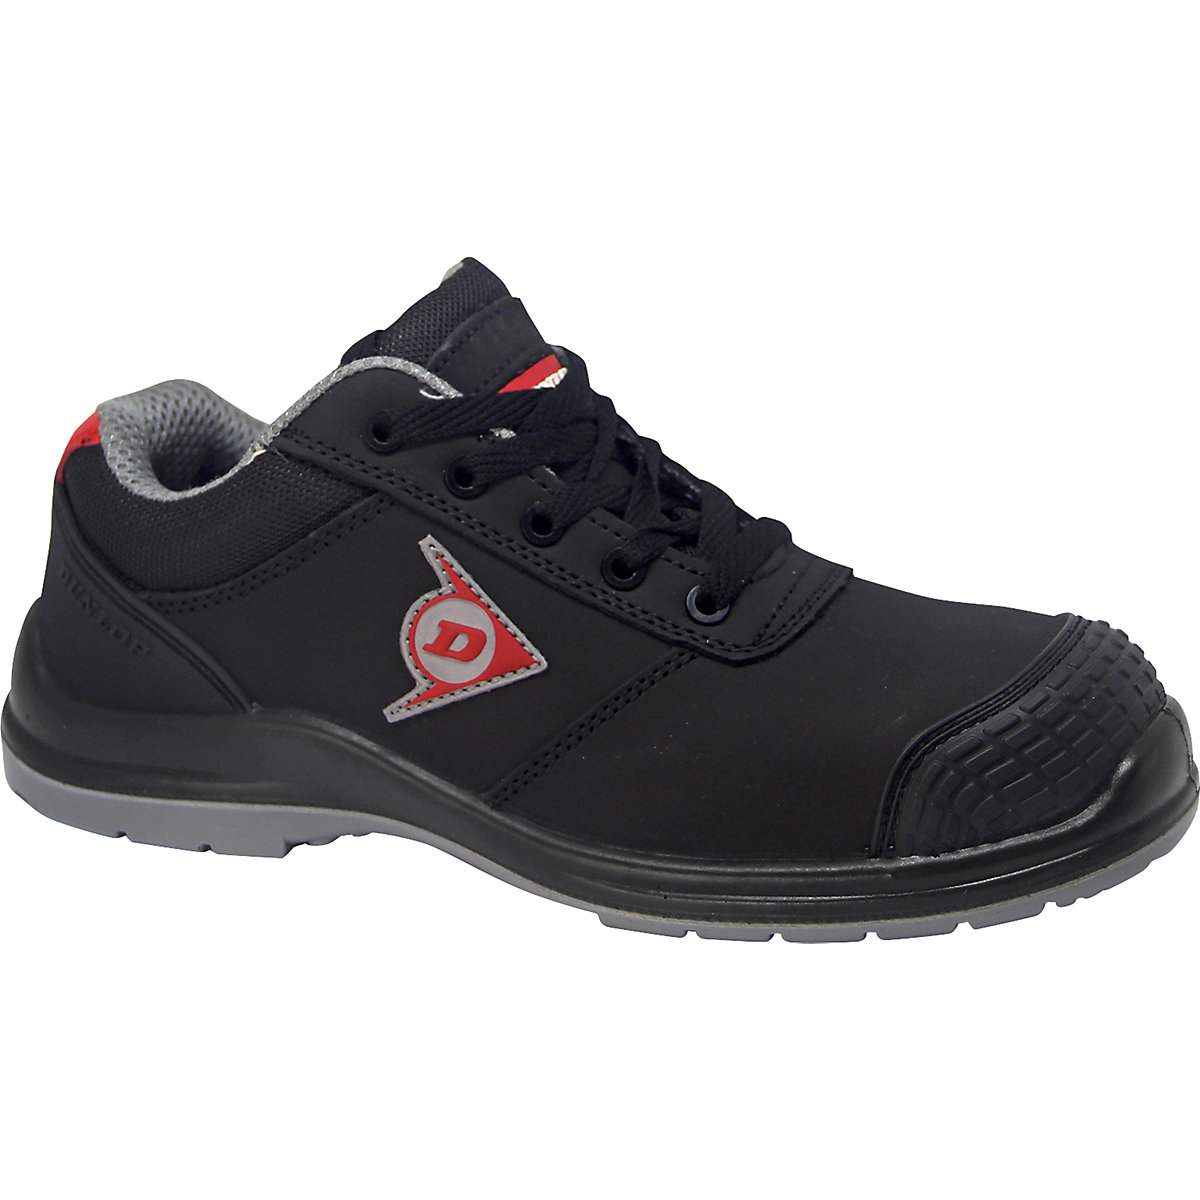 FIRST ONE ADV-EVO LOW S3 safety lace-up shoes - DUNLOP